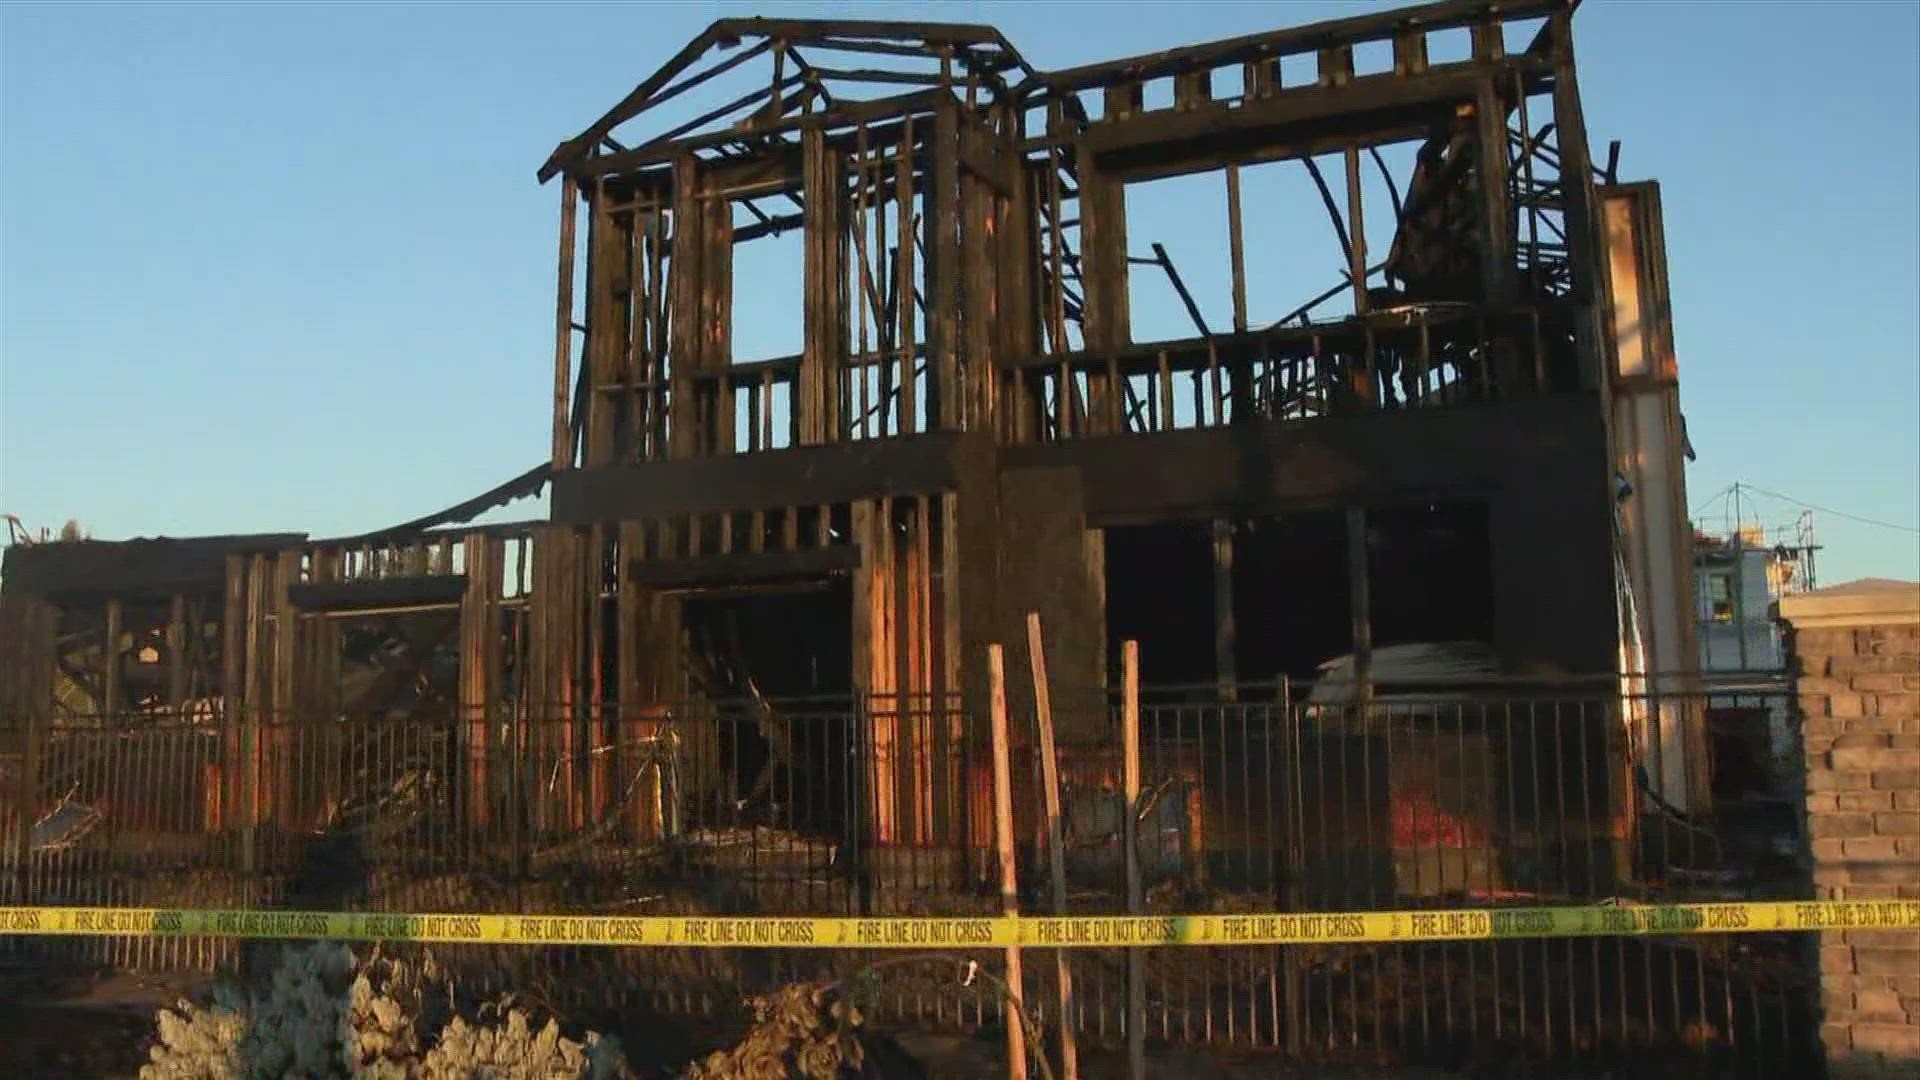 The fire was located near 5301 East Commerce Way and about 8 units under construction were affected by the fire, according to the Sacramento Fire Department.